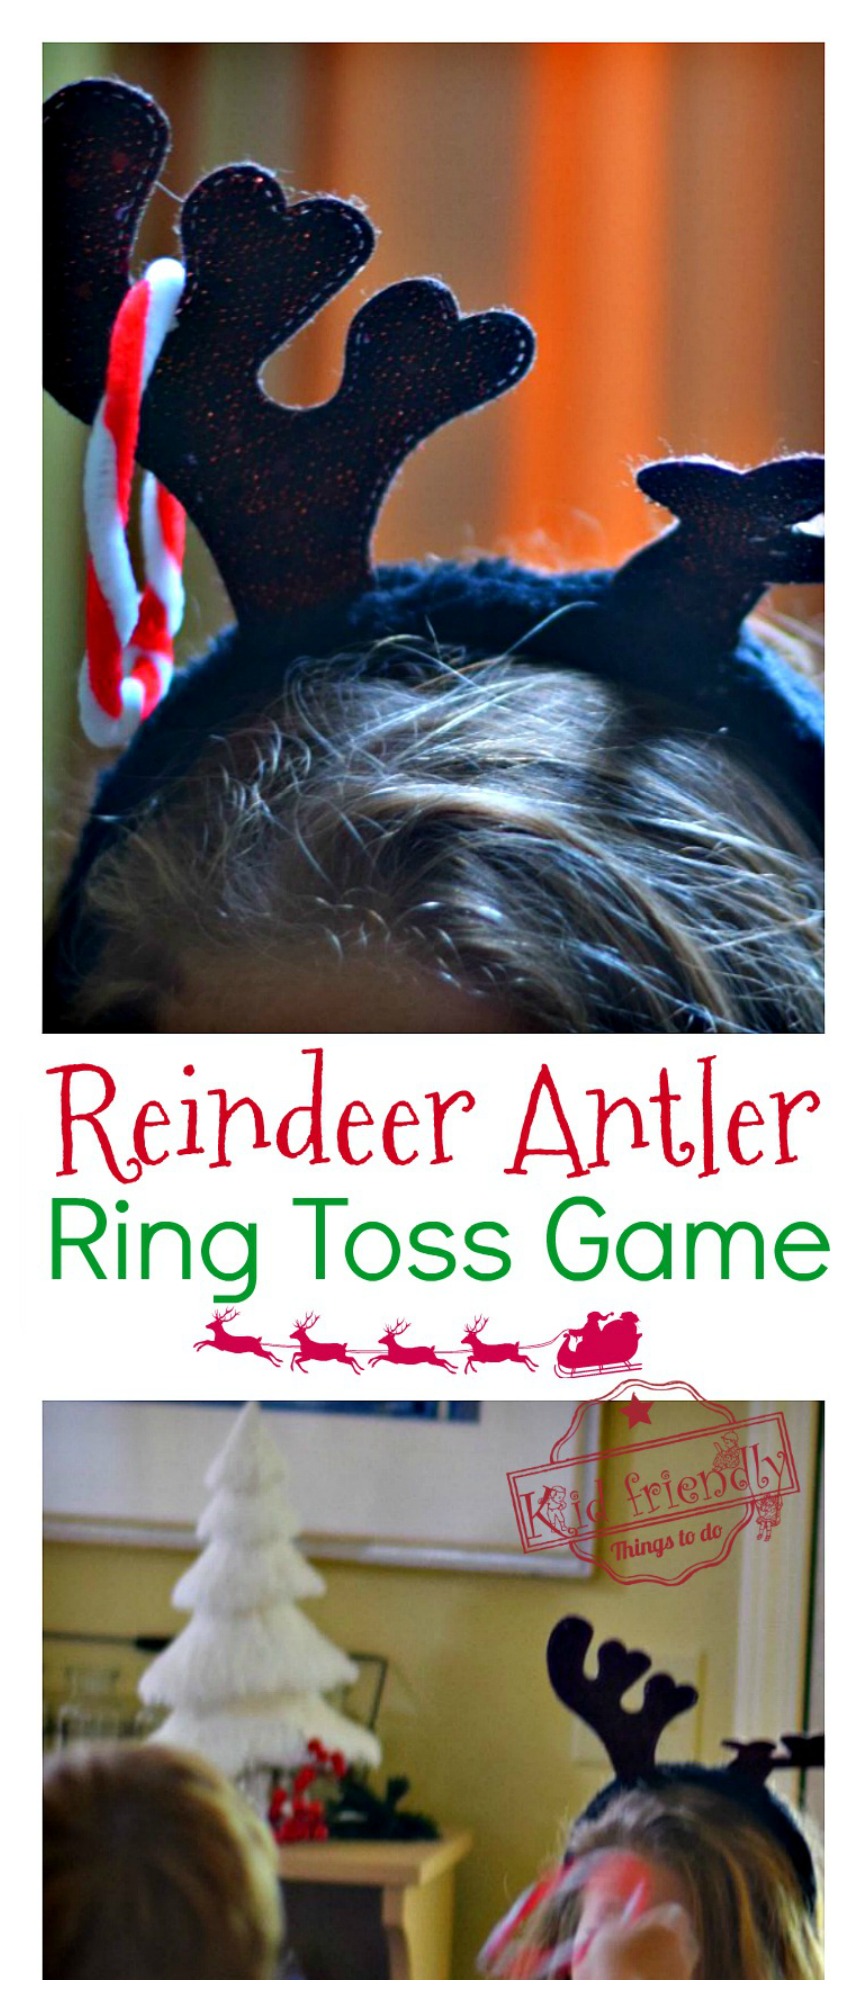 Ring the Reindeer Antlers - Human Ring Toss Game for Christmas Fun with the Kids! - Great Christmas family or school game - www.kidfriendlythingstodo.com